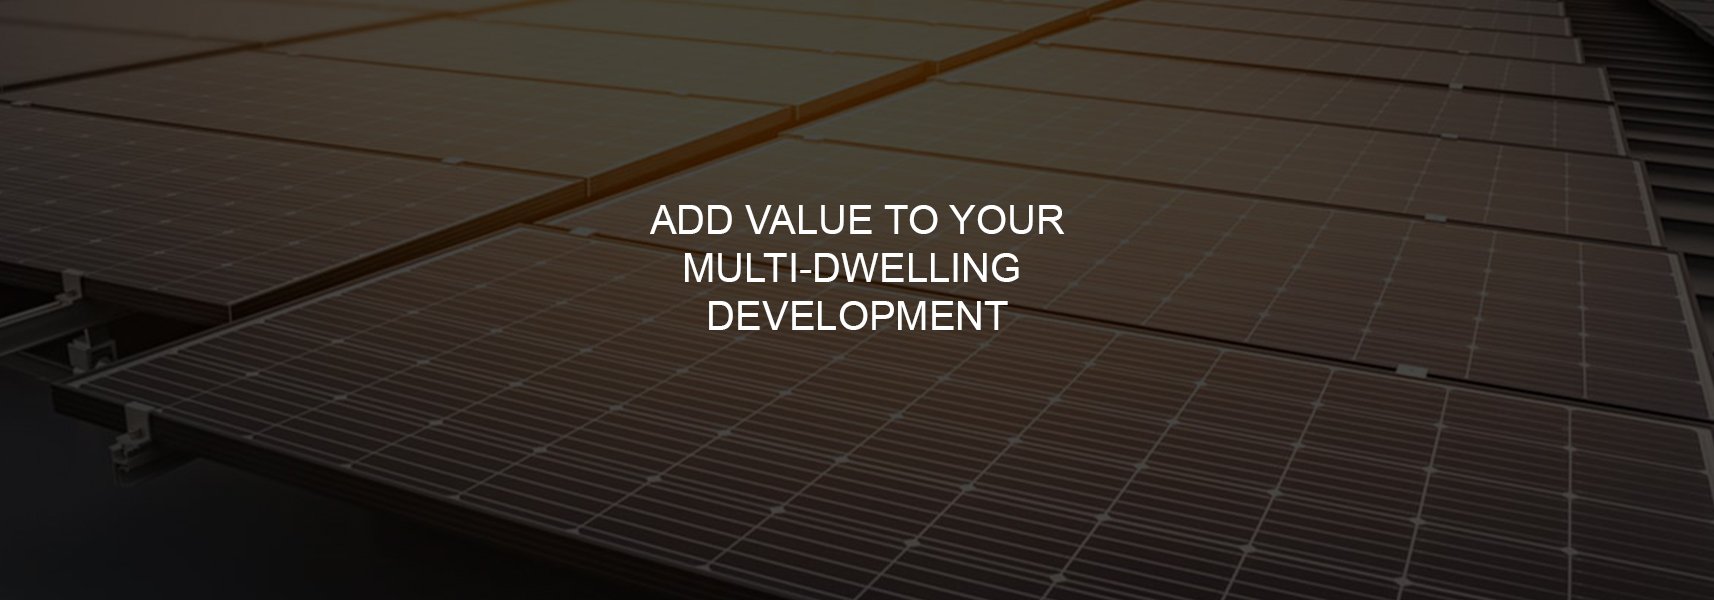 Add value to your multi-dwelling development - featured image